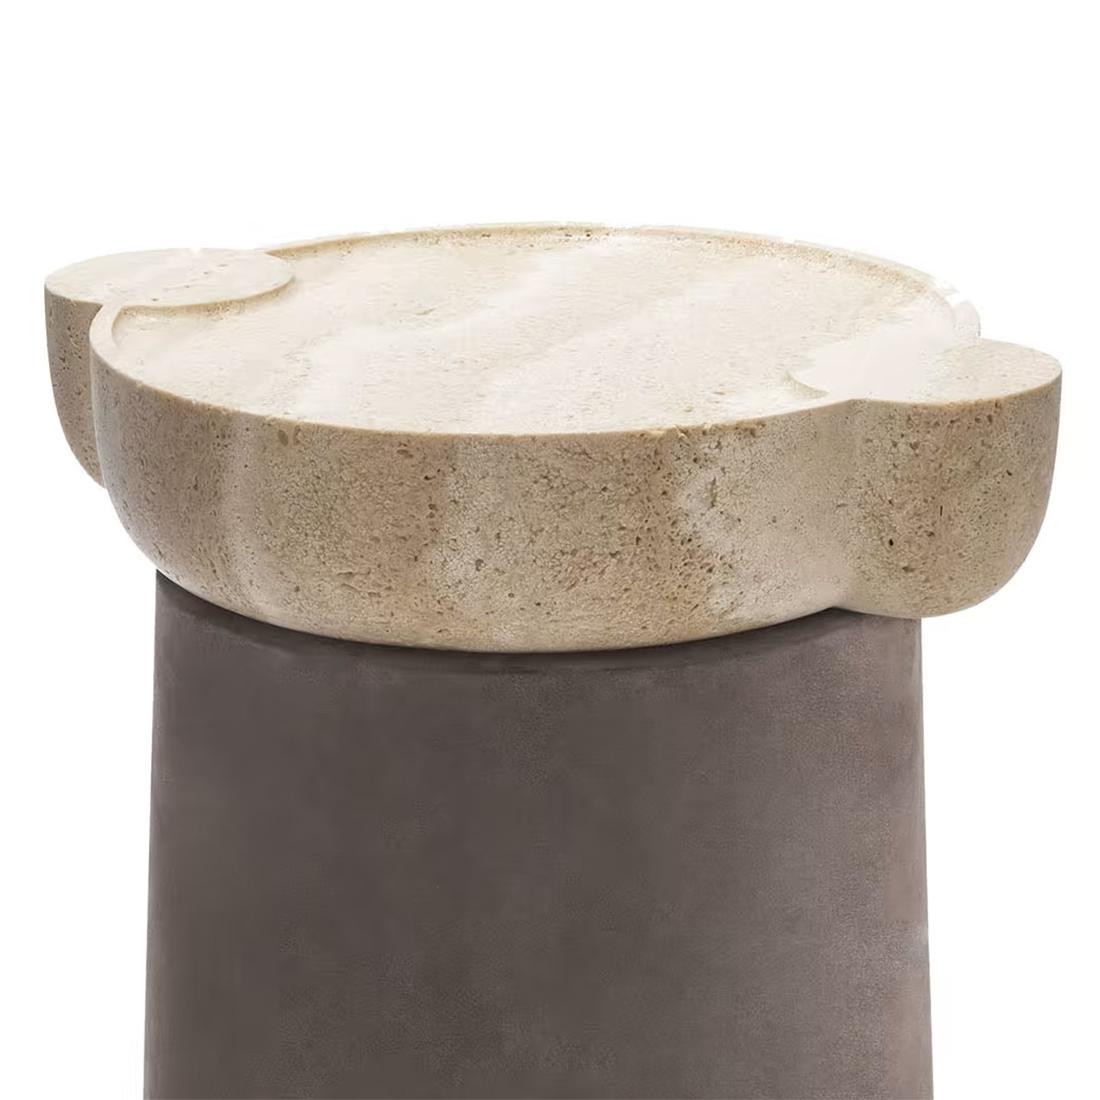 Side Table Elko with wooden structure covered with dark grey
genuine suede leather. With carved polished travertine top.
Also available with other leather or suede leather colors, 
on request.